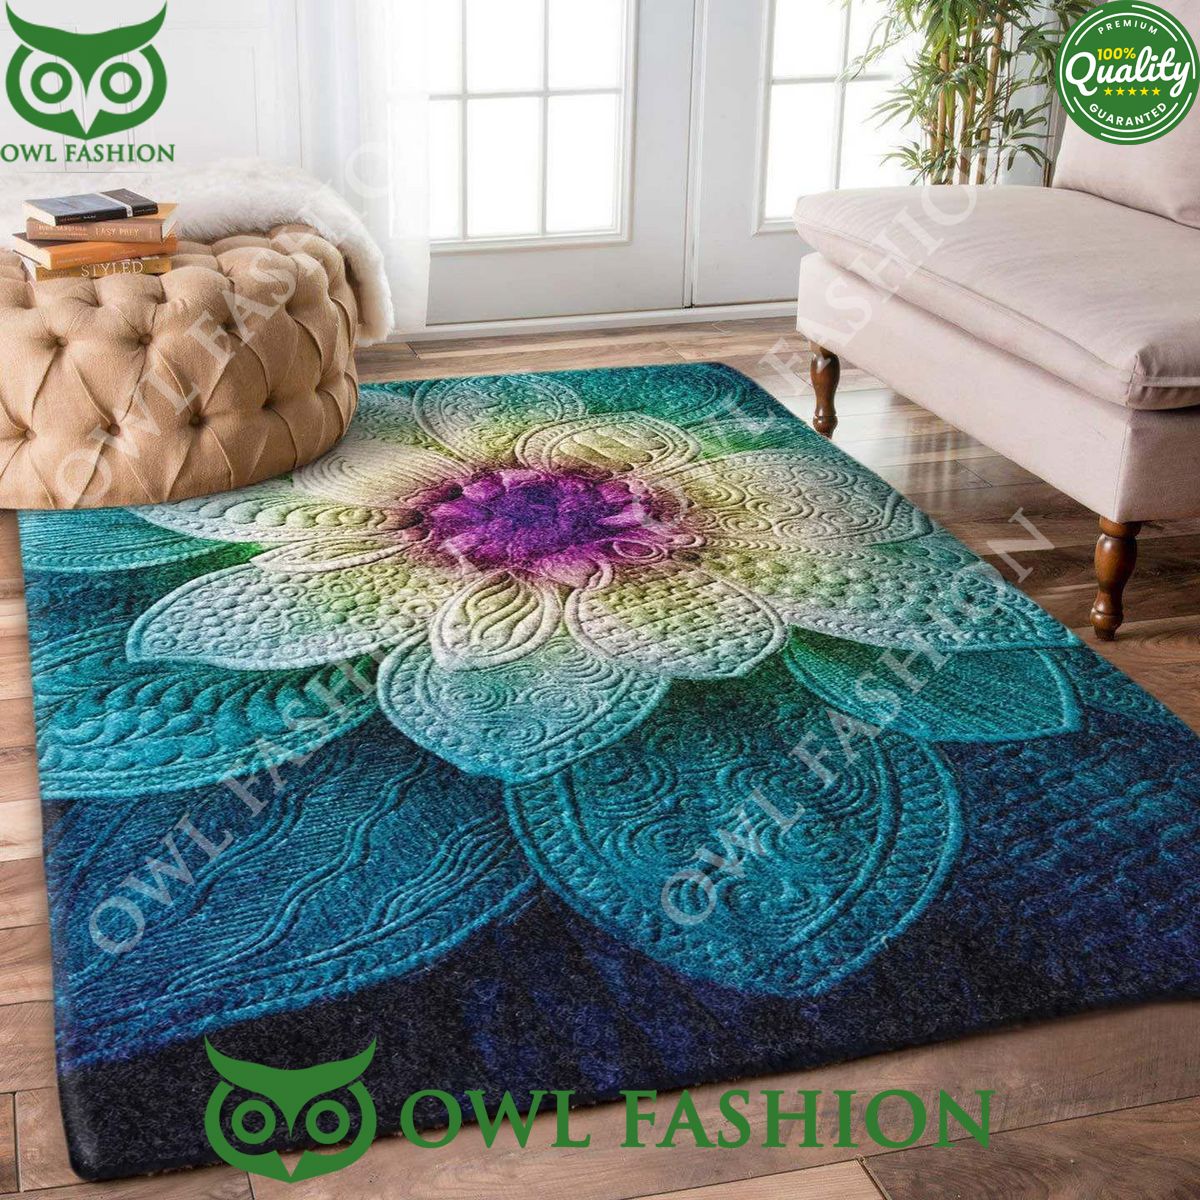 Pattern Flower Rug Carpet This design is absolutely stunning.